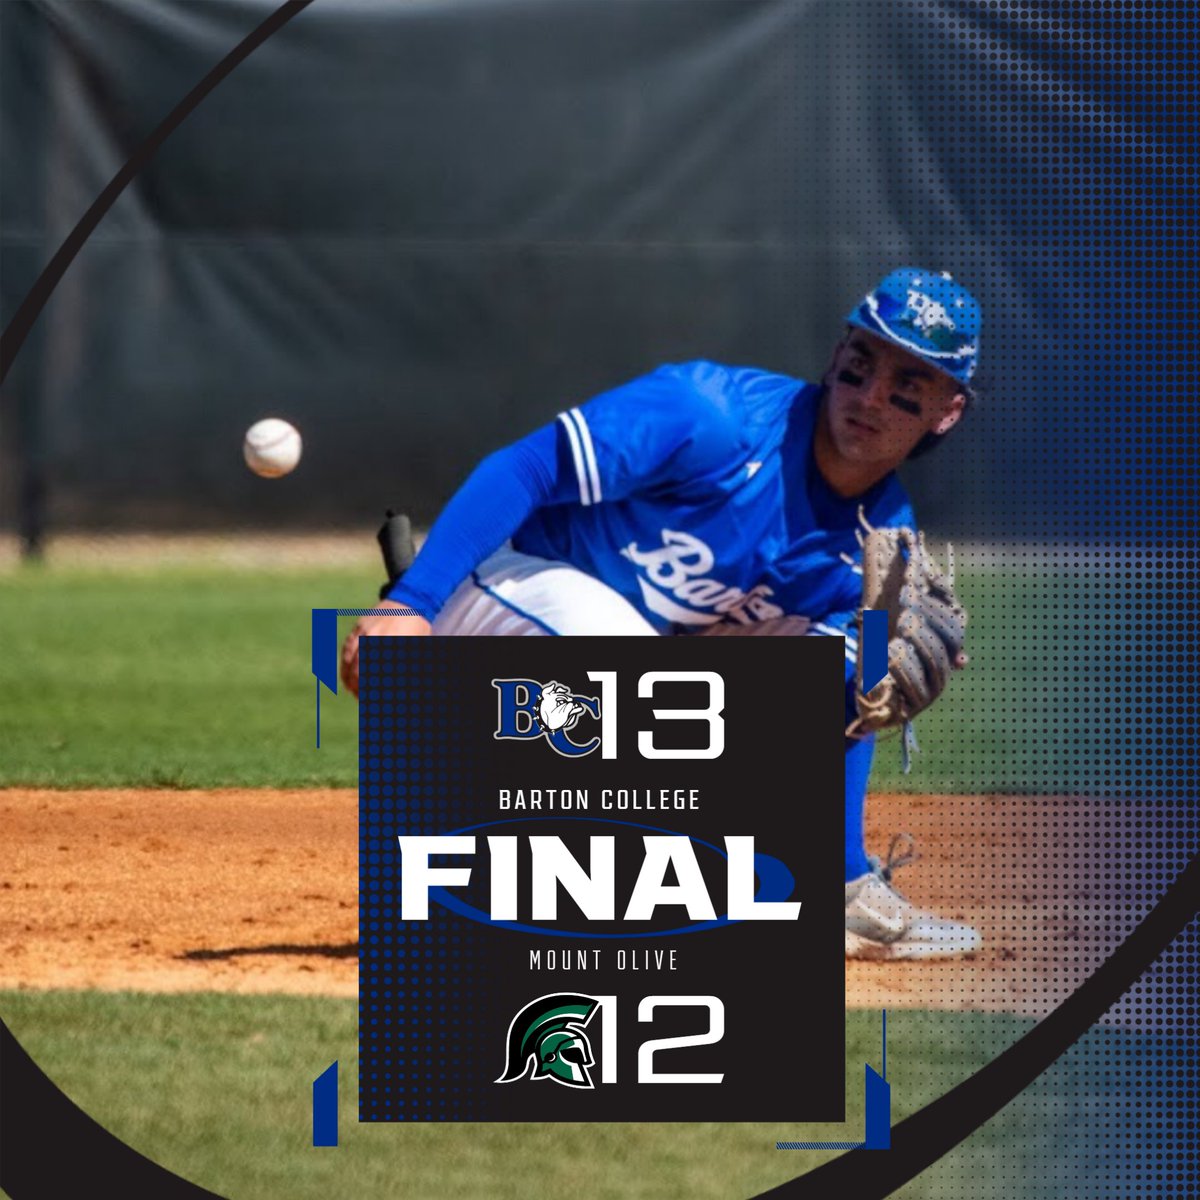 SAL LAIMO WALKS IT OFF TO COMPLETE THE SWEEP! #GoBulldogs